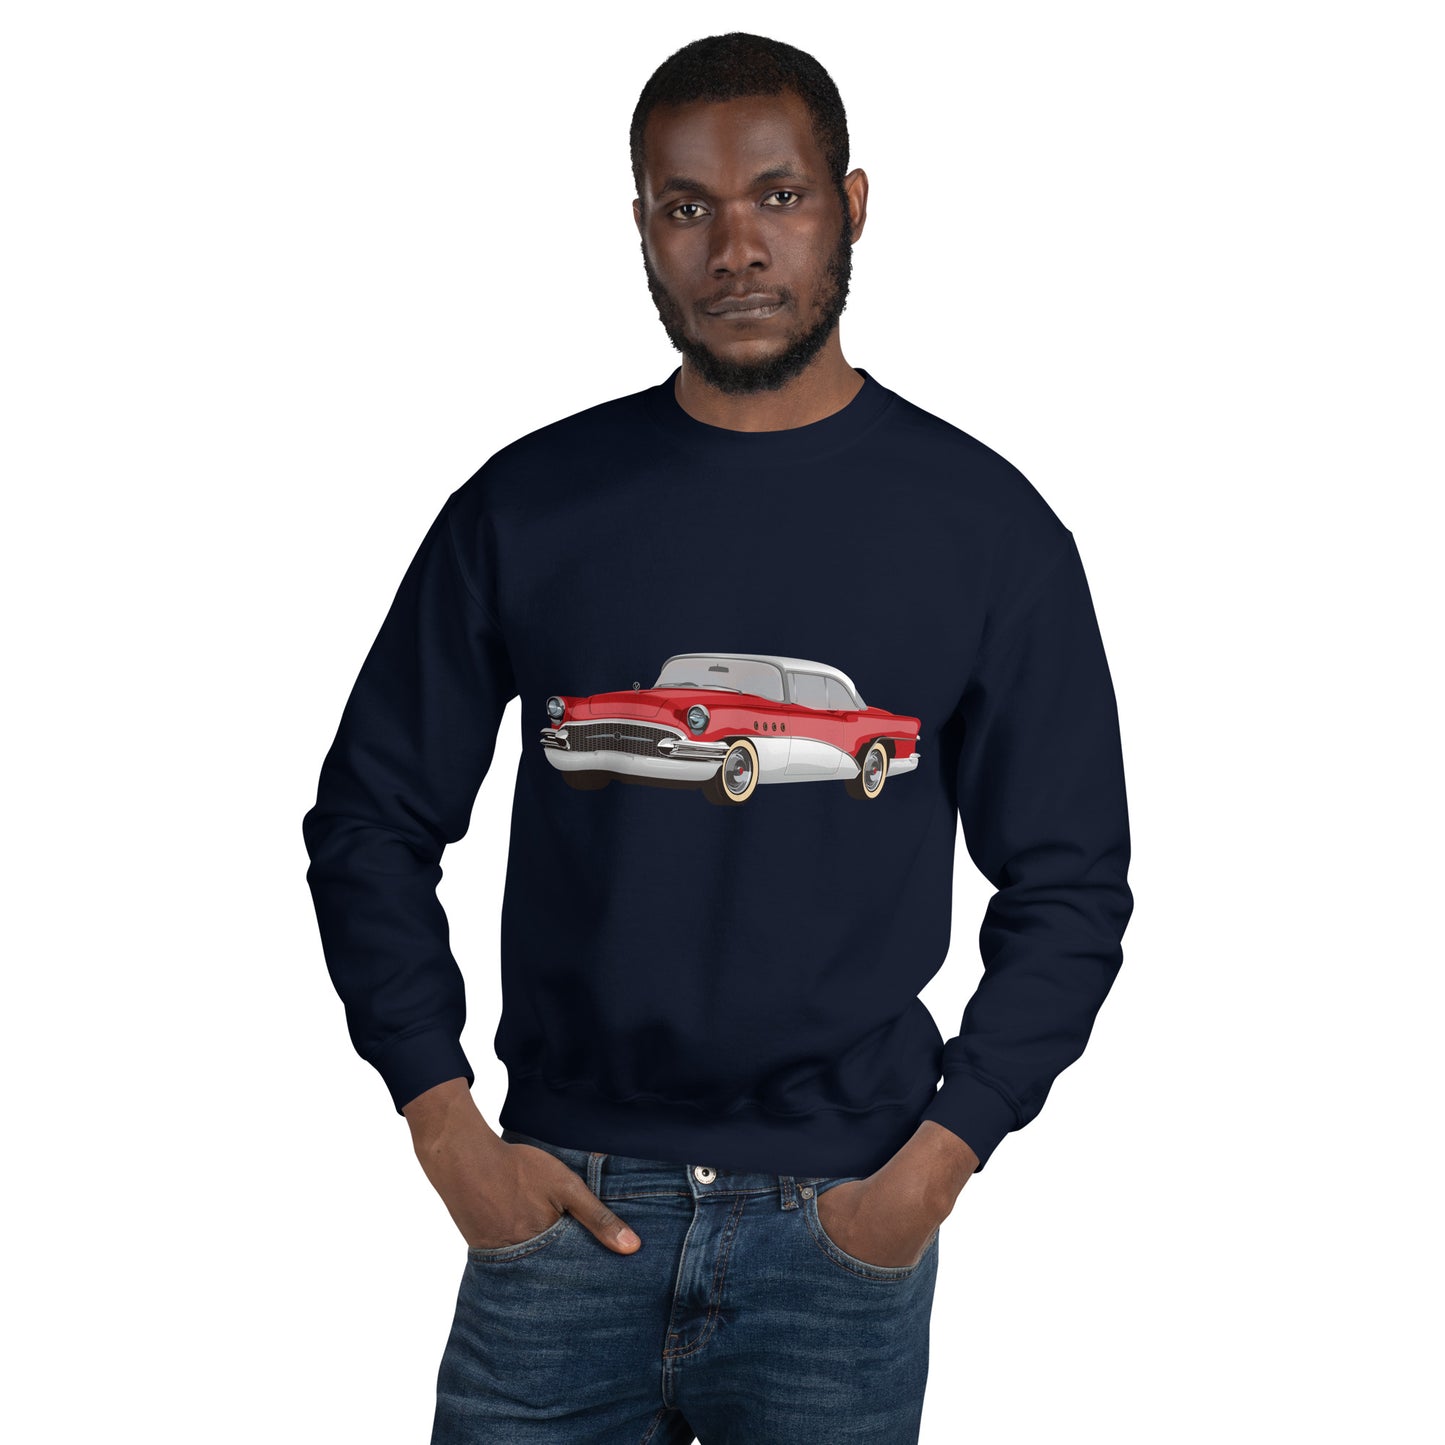 Man with navy sweatshirt with red chevrolet